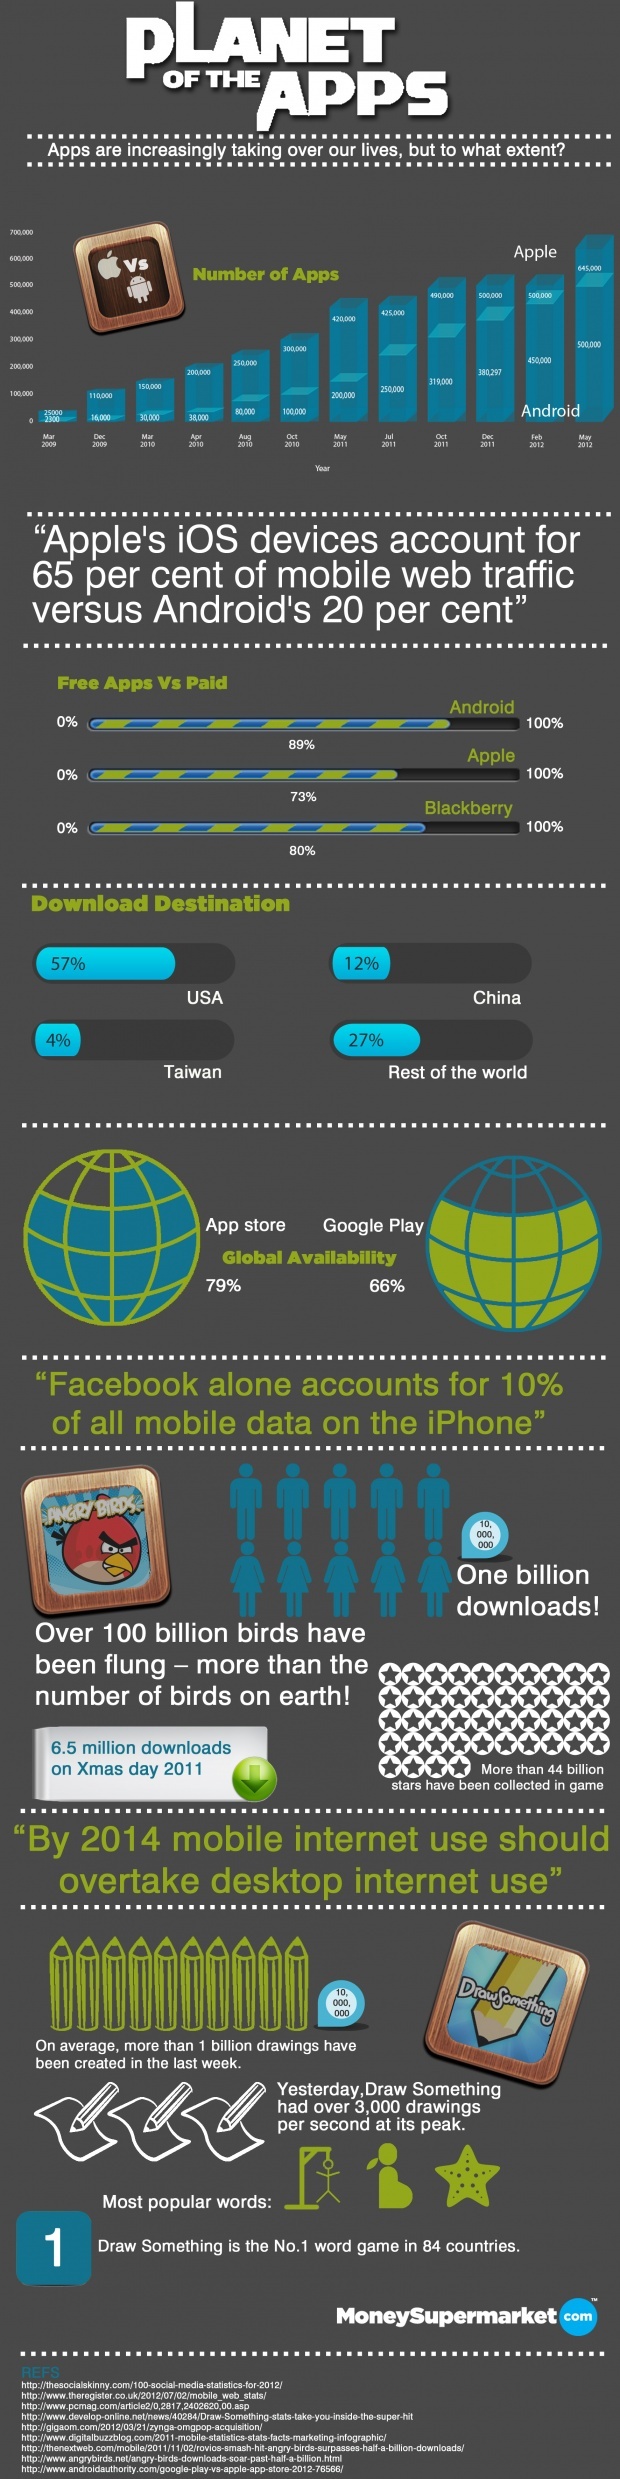 2. Planet of the Apps